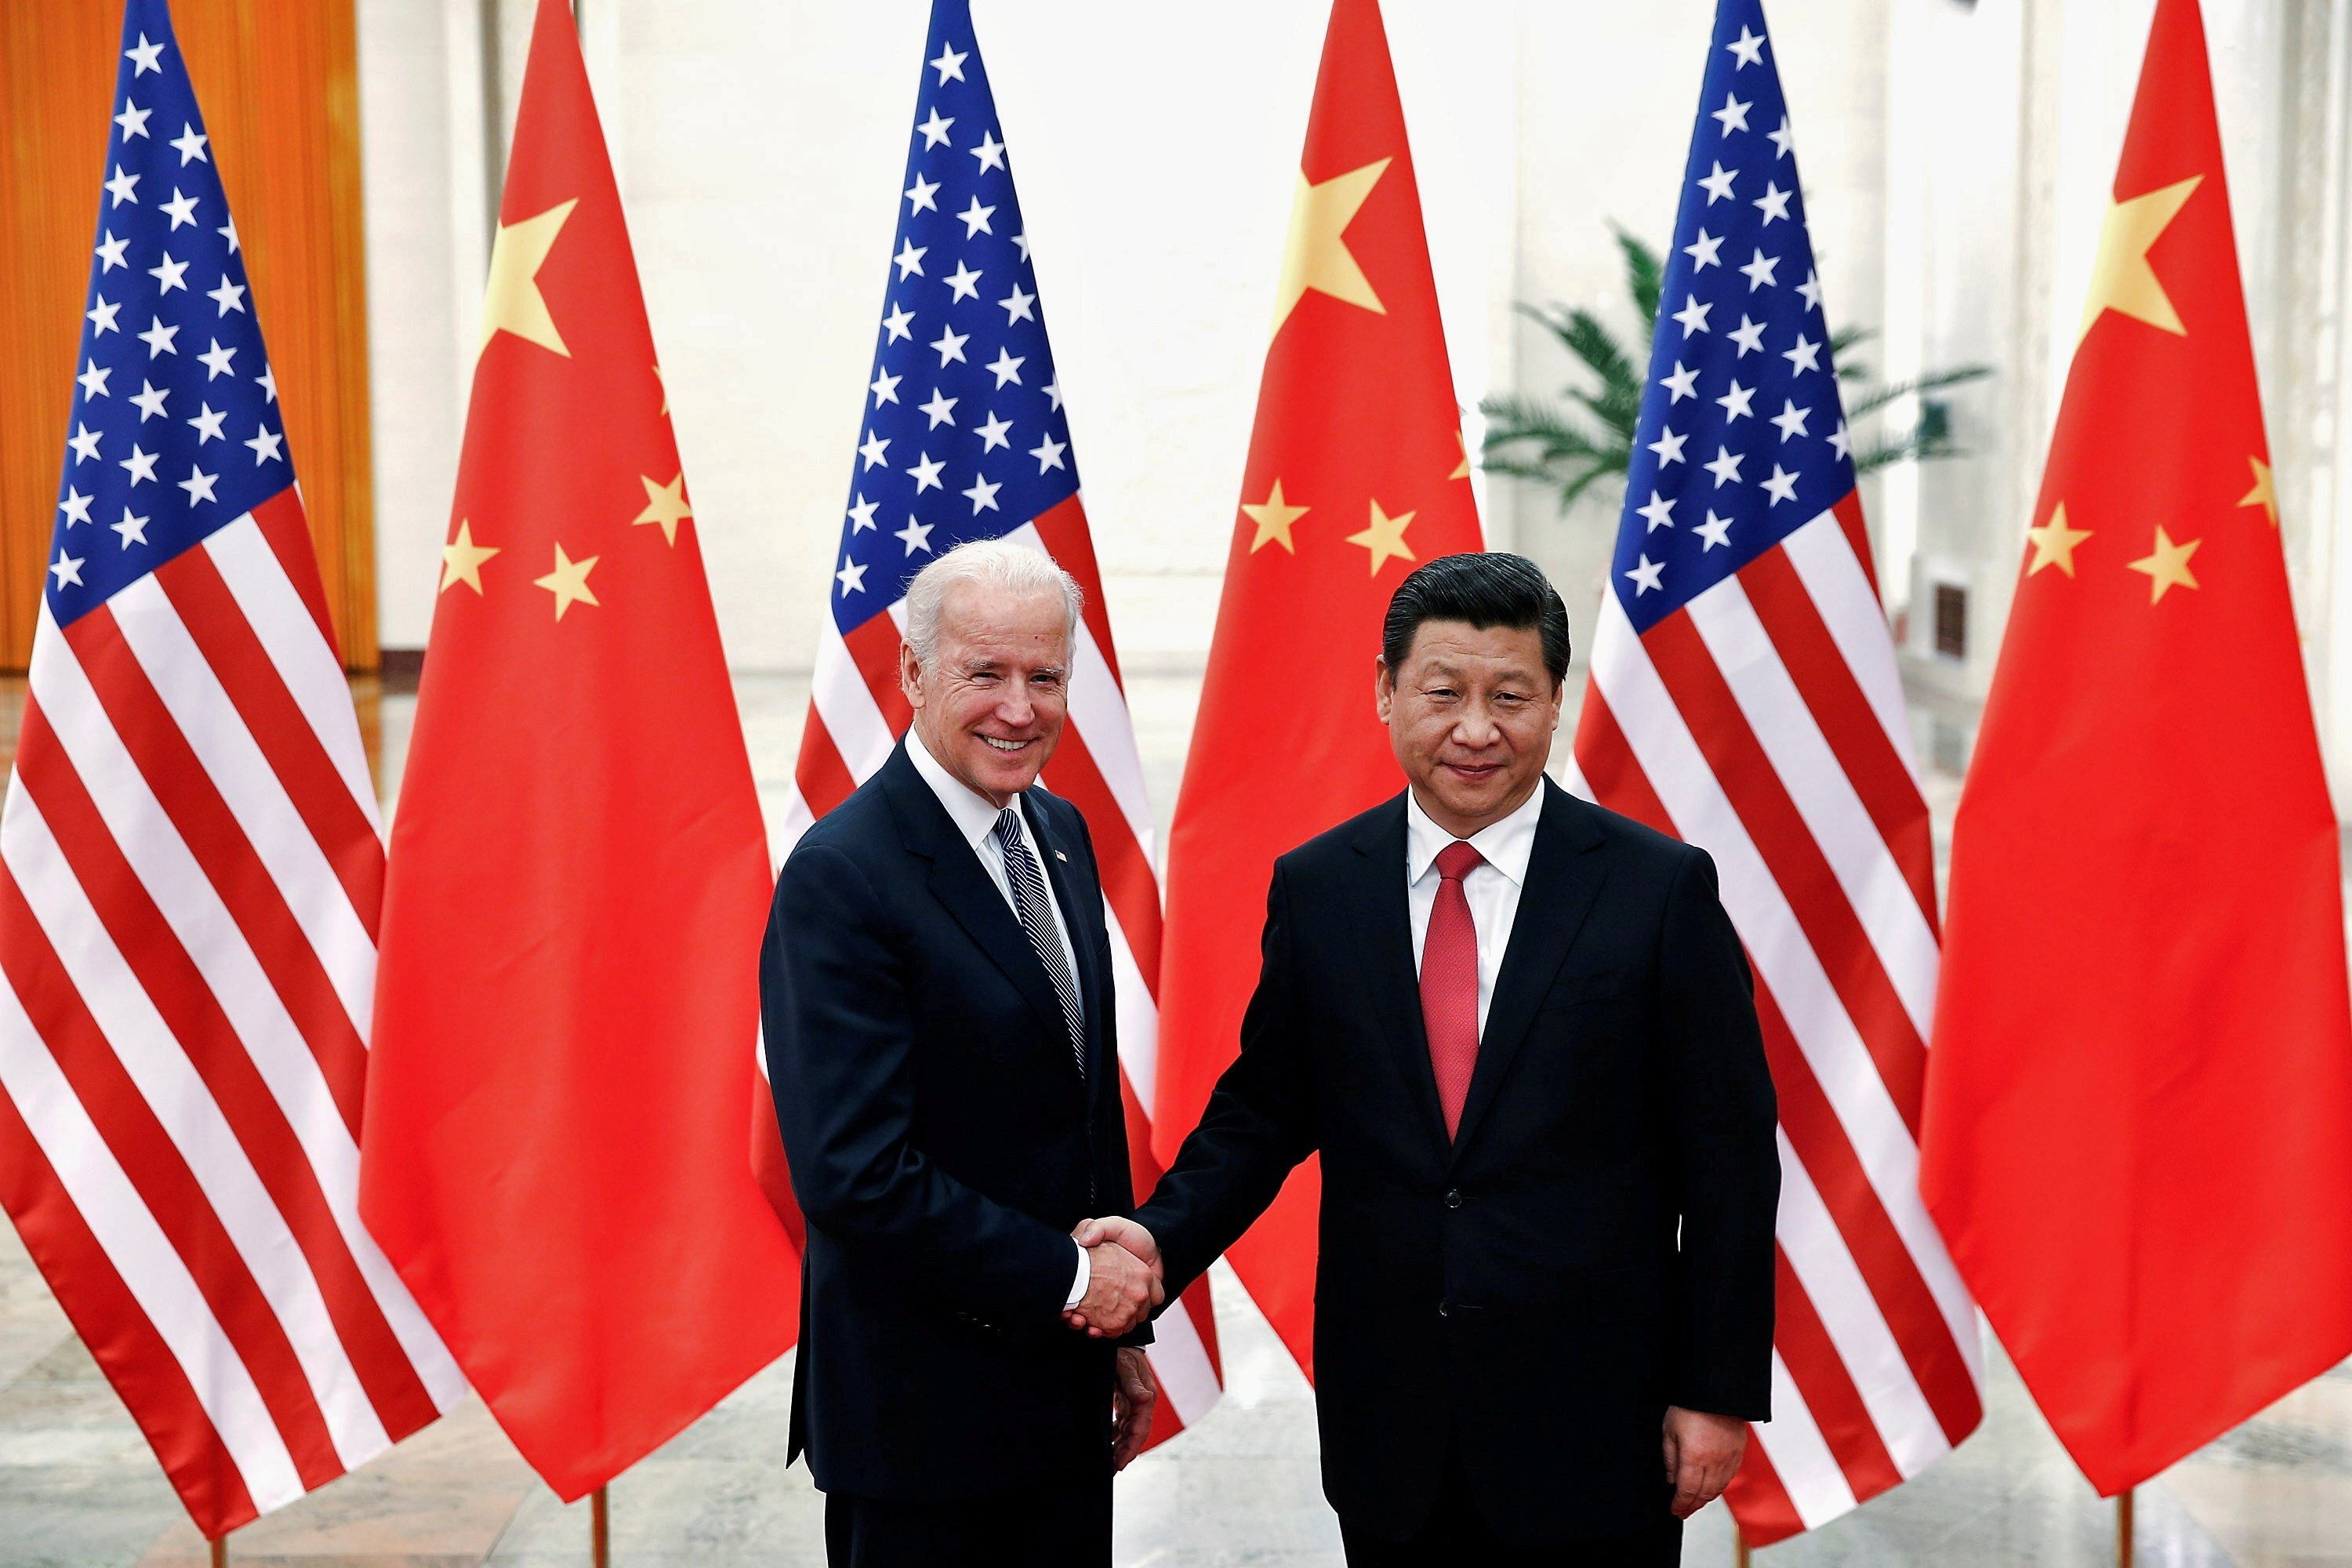 Chinese President Xi Jinping shakes hands with US President Joe Biden in 2013, when Biden was vice president. Photo: Reuters